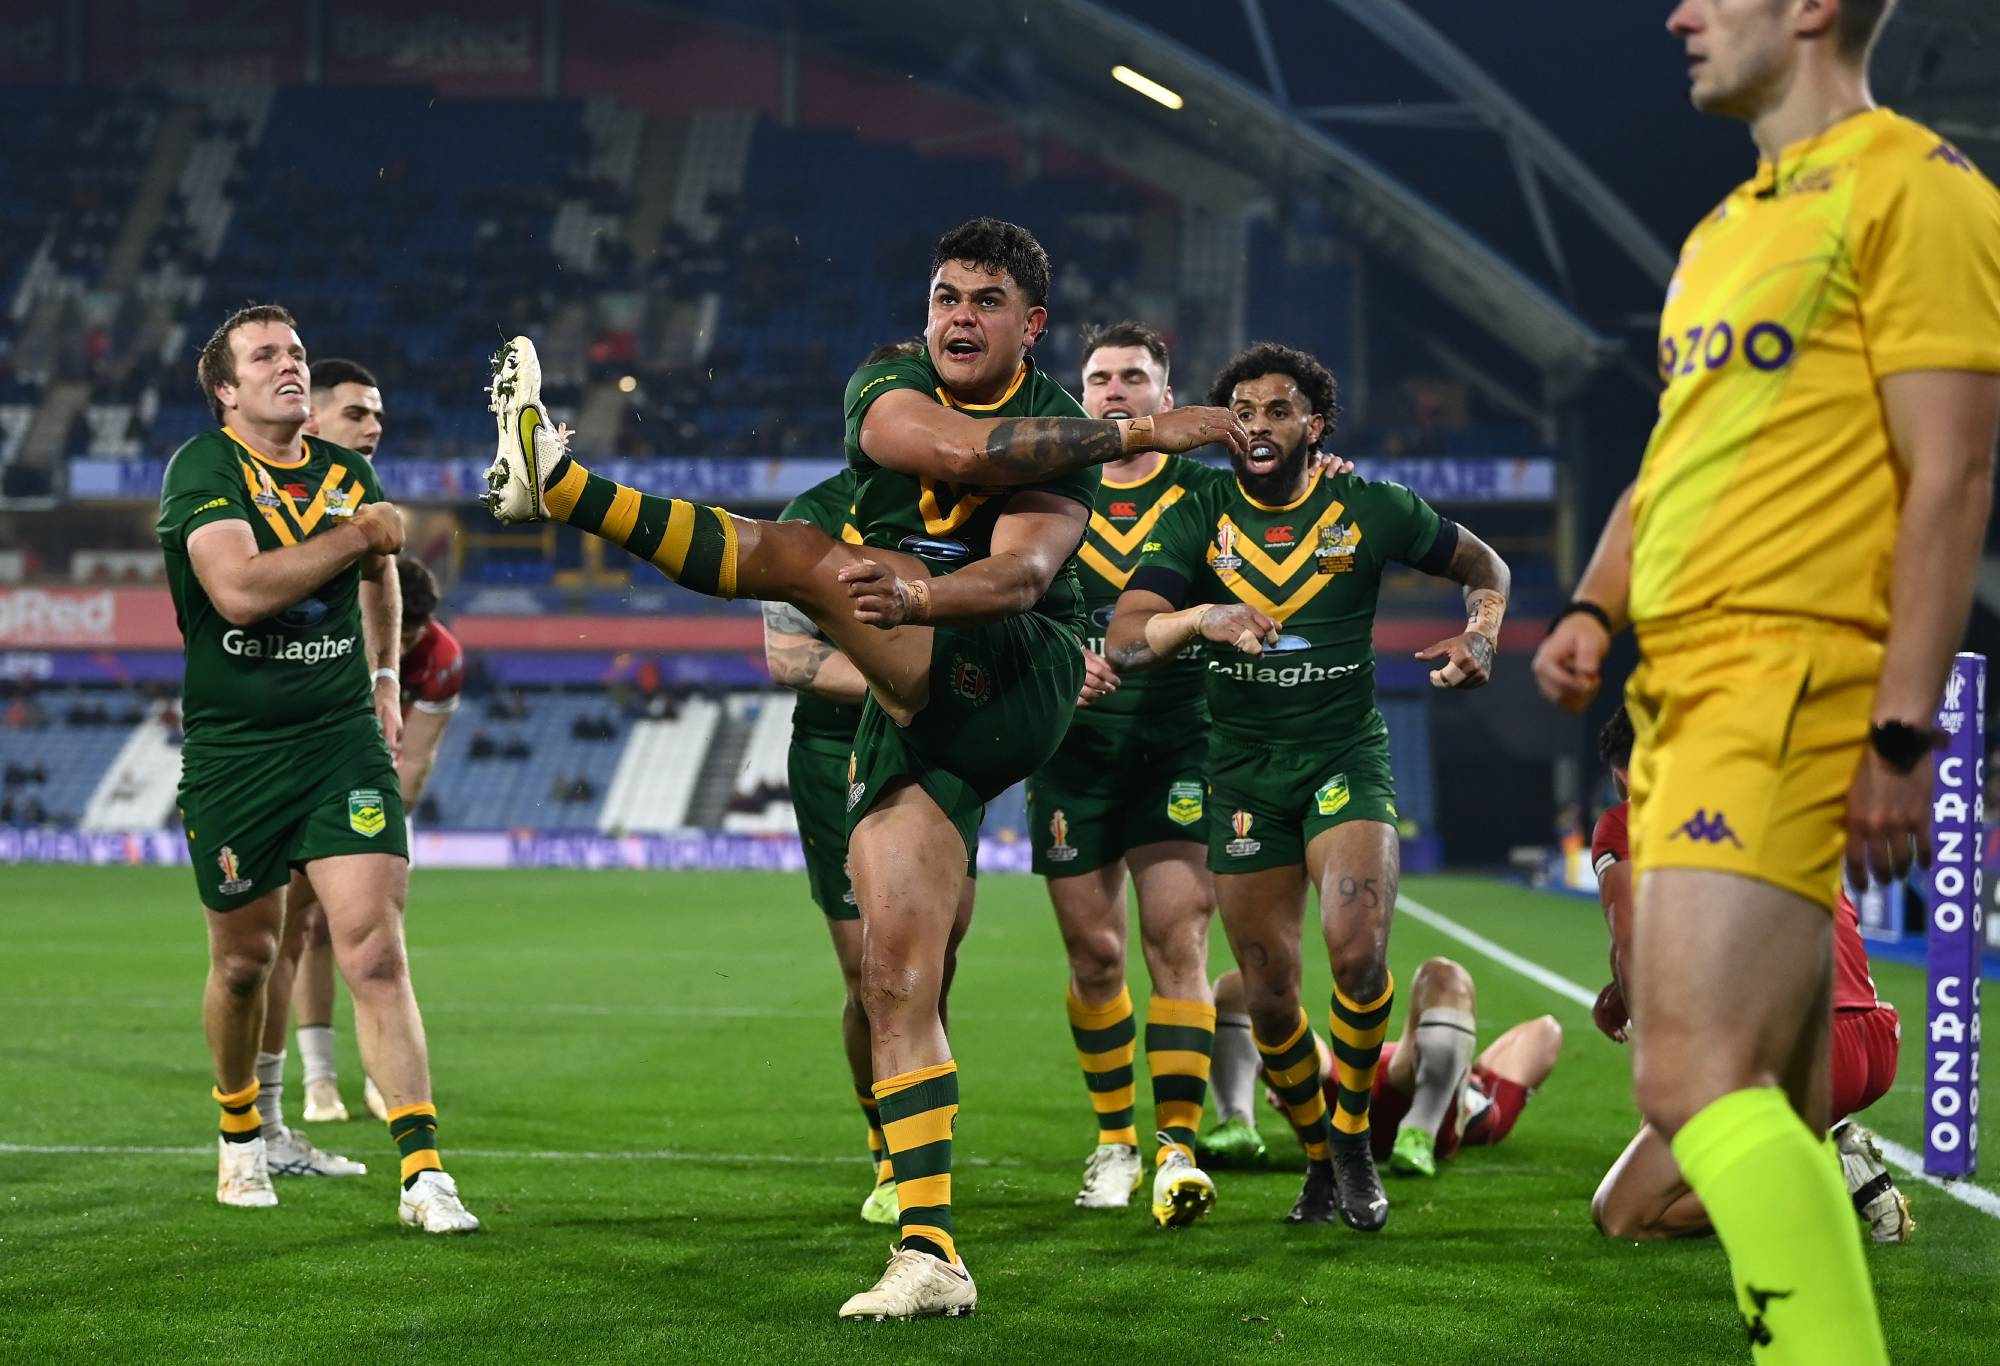 HUDDERSFIELD, ENGLAND - NOVEMBER 04: Latrell Mitchell of Australia celebrates after scoring their team's fourth try during the Rugby League World Cup Quarter Final match between Australia and Lebanon at John Smith's Stadium on November 04, 2022 in Huddersfield, England. (Photo by Gareth Copley/Getty Images)